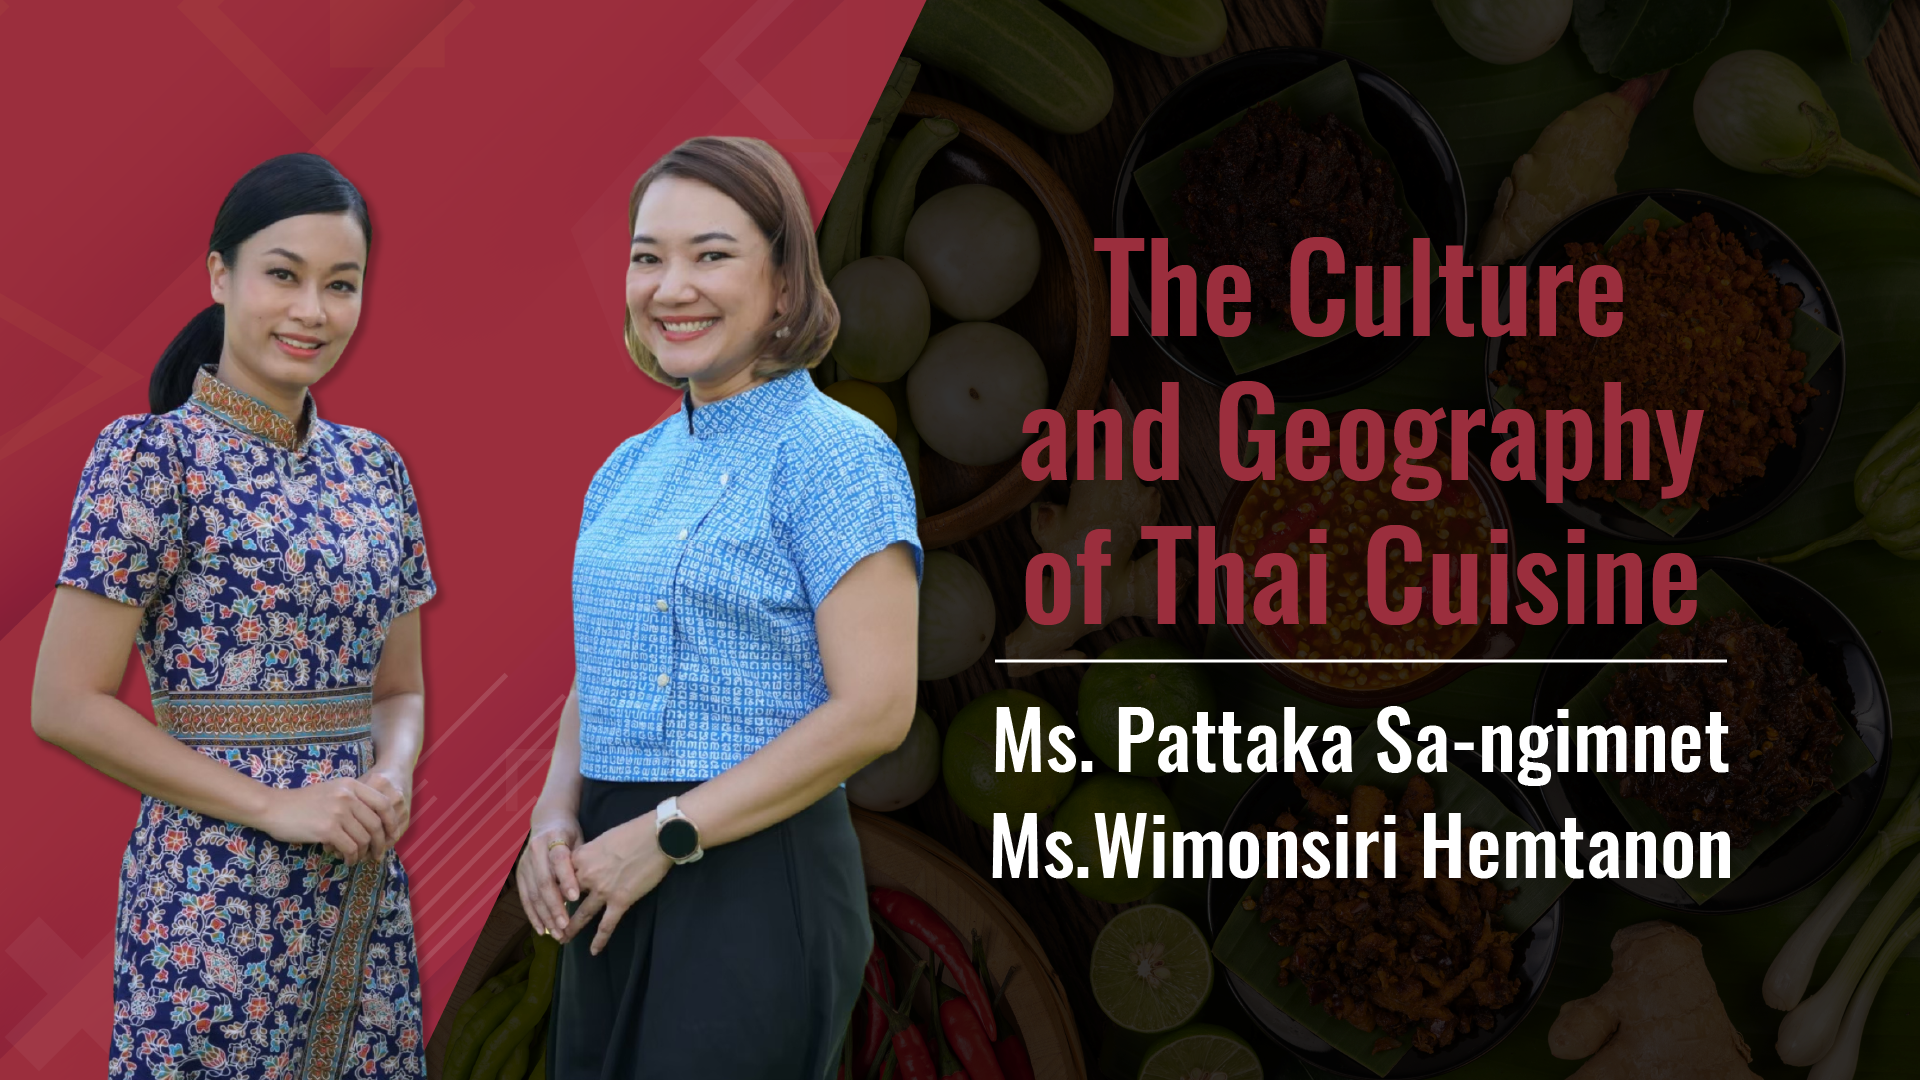 The Culture and Geography of Thai Cuisine 027